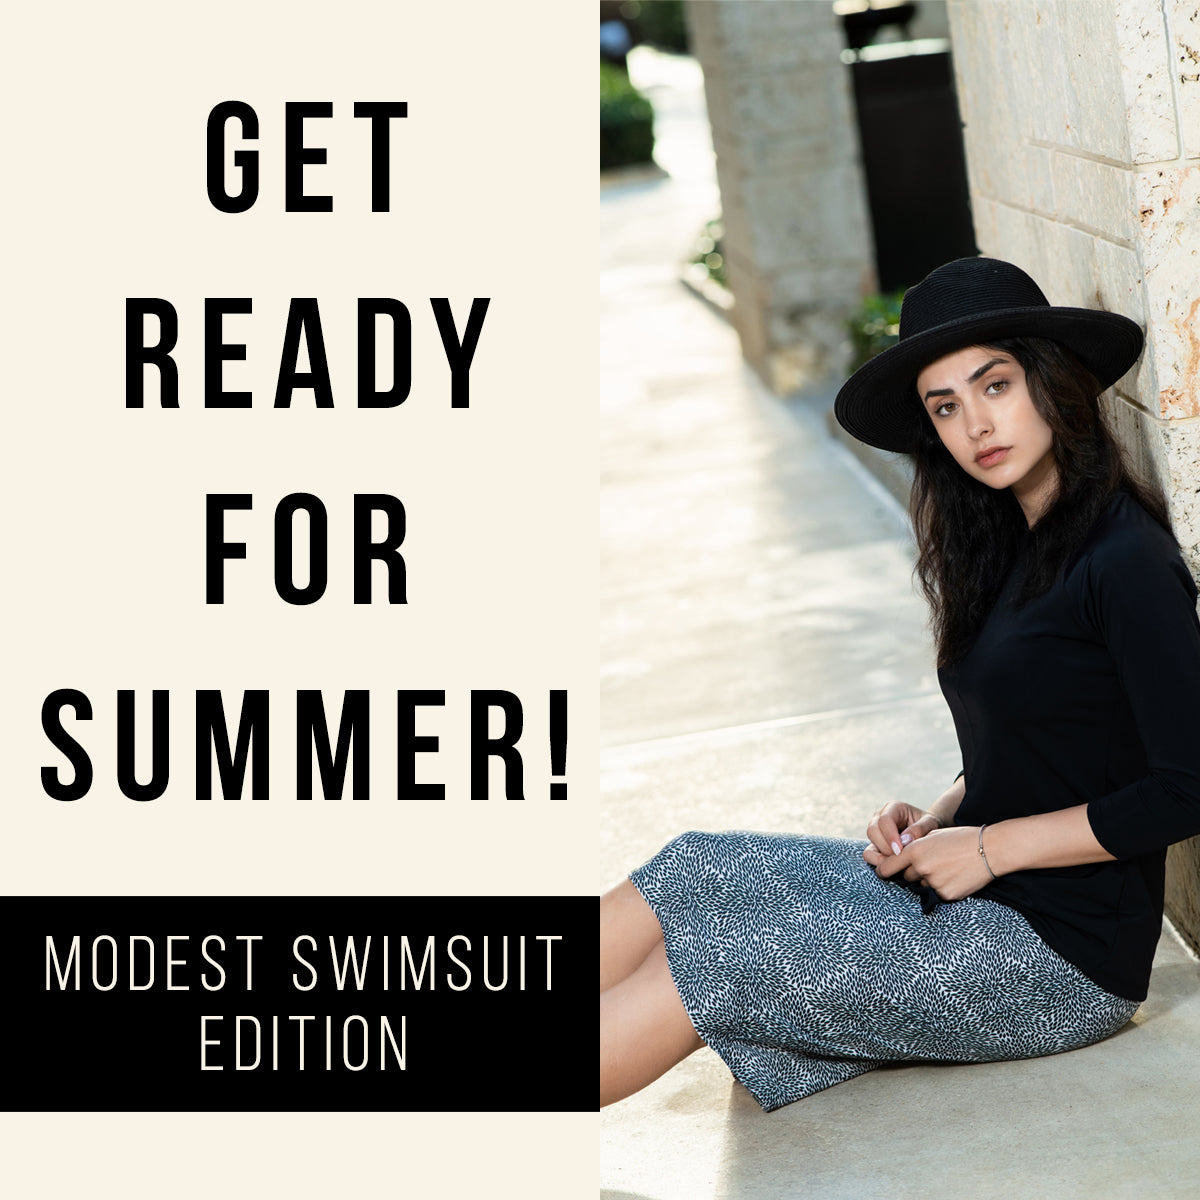 Get Ready for Summer with beautiful Modest Swimwear